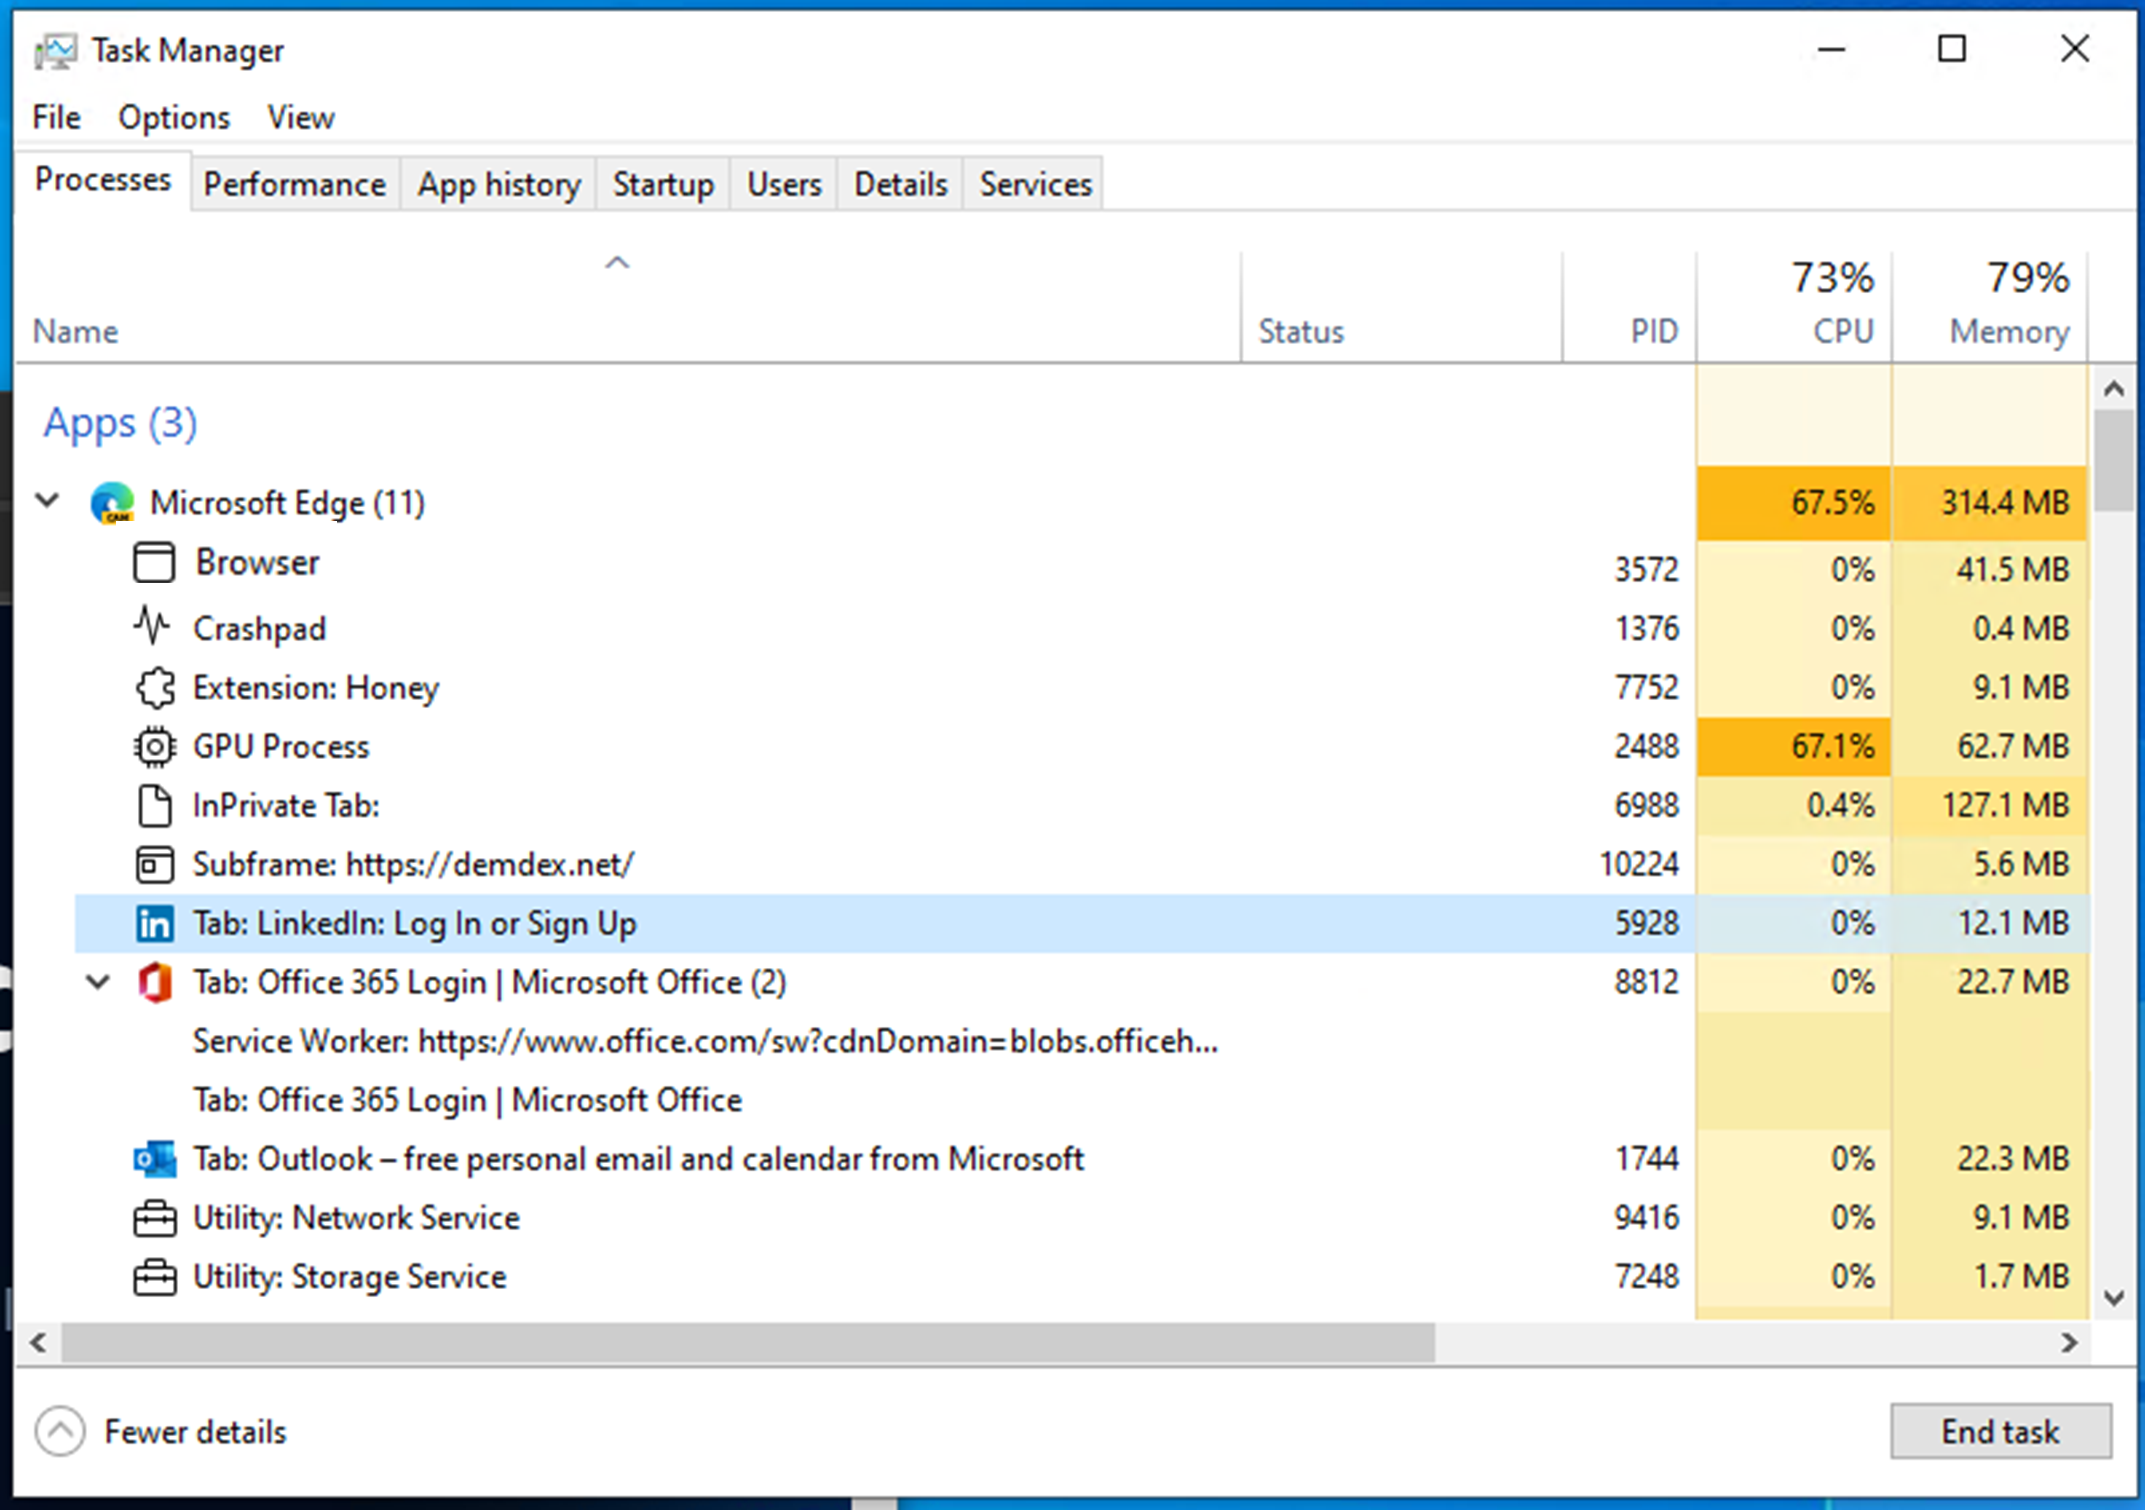 If a program is not listed, click on the Open Task Manager link at the bottom of the window to open the Startup tab in the Task Manager window.
In the Task Manager window, right-click on the program and select Enable.